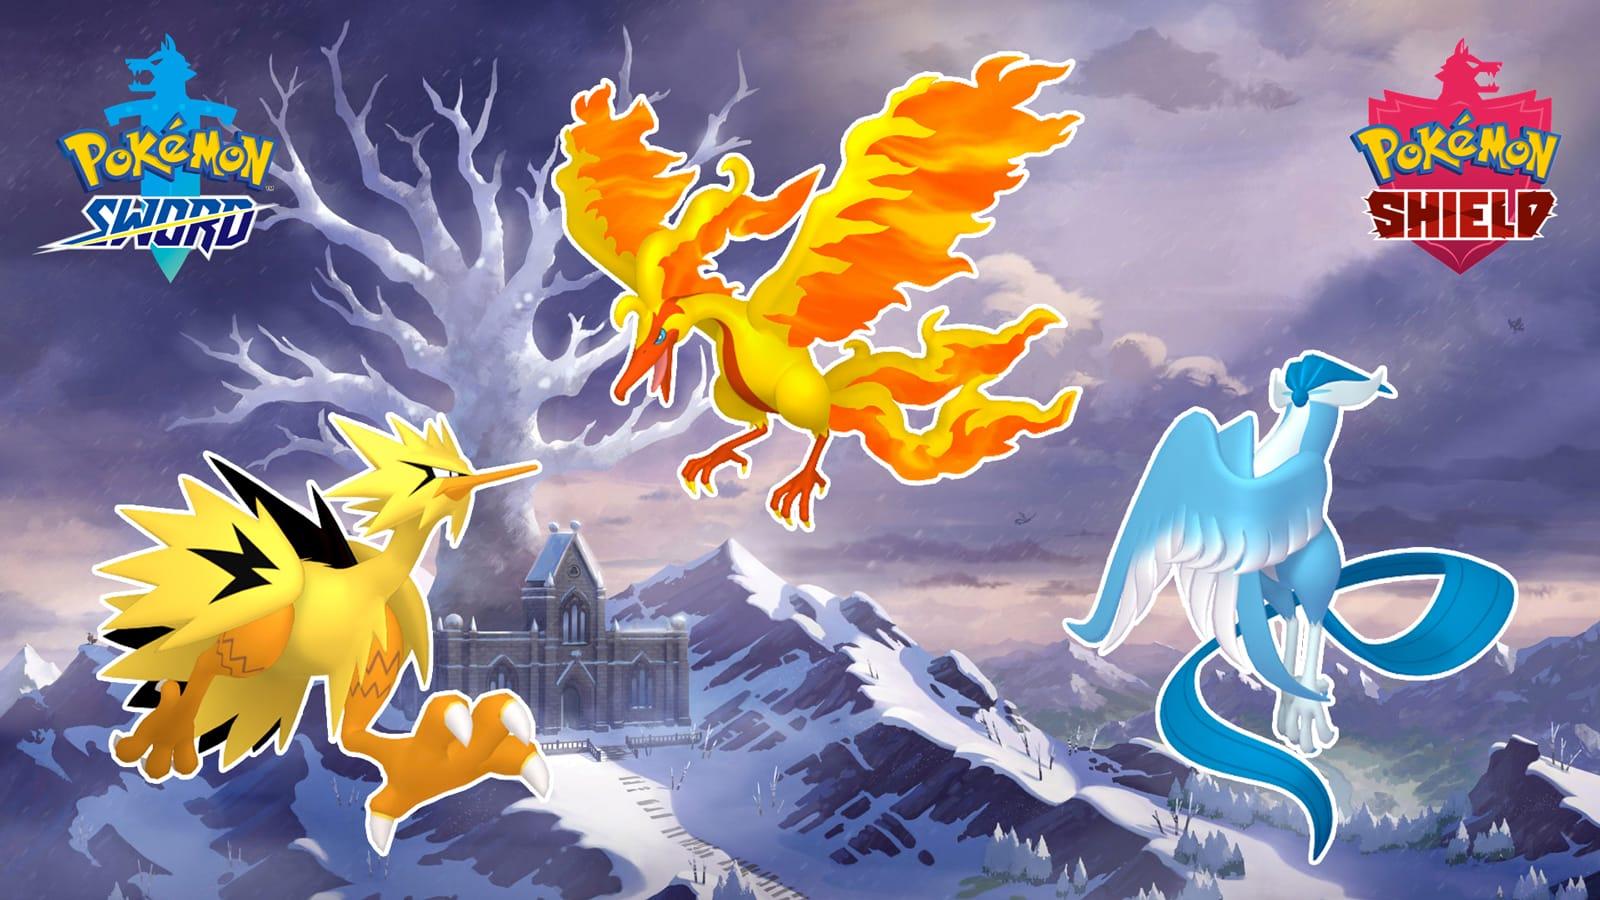 How to get Shiny Galarian Articuno, Zapdos and Moltres in Pokemon